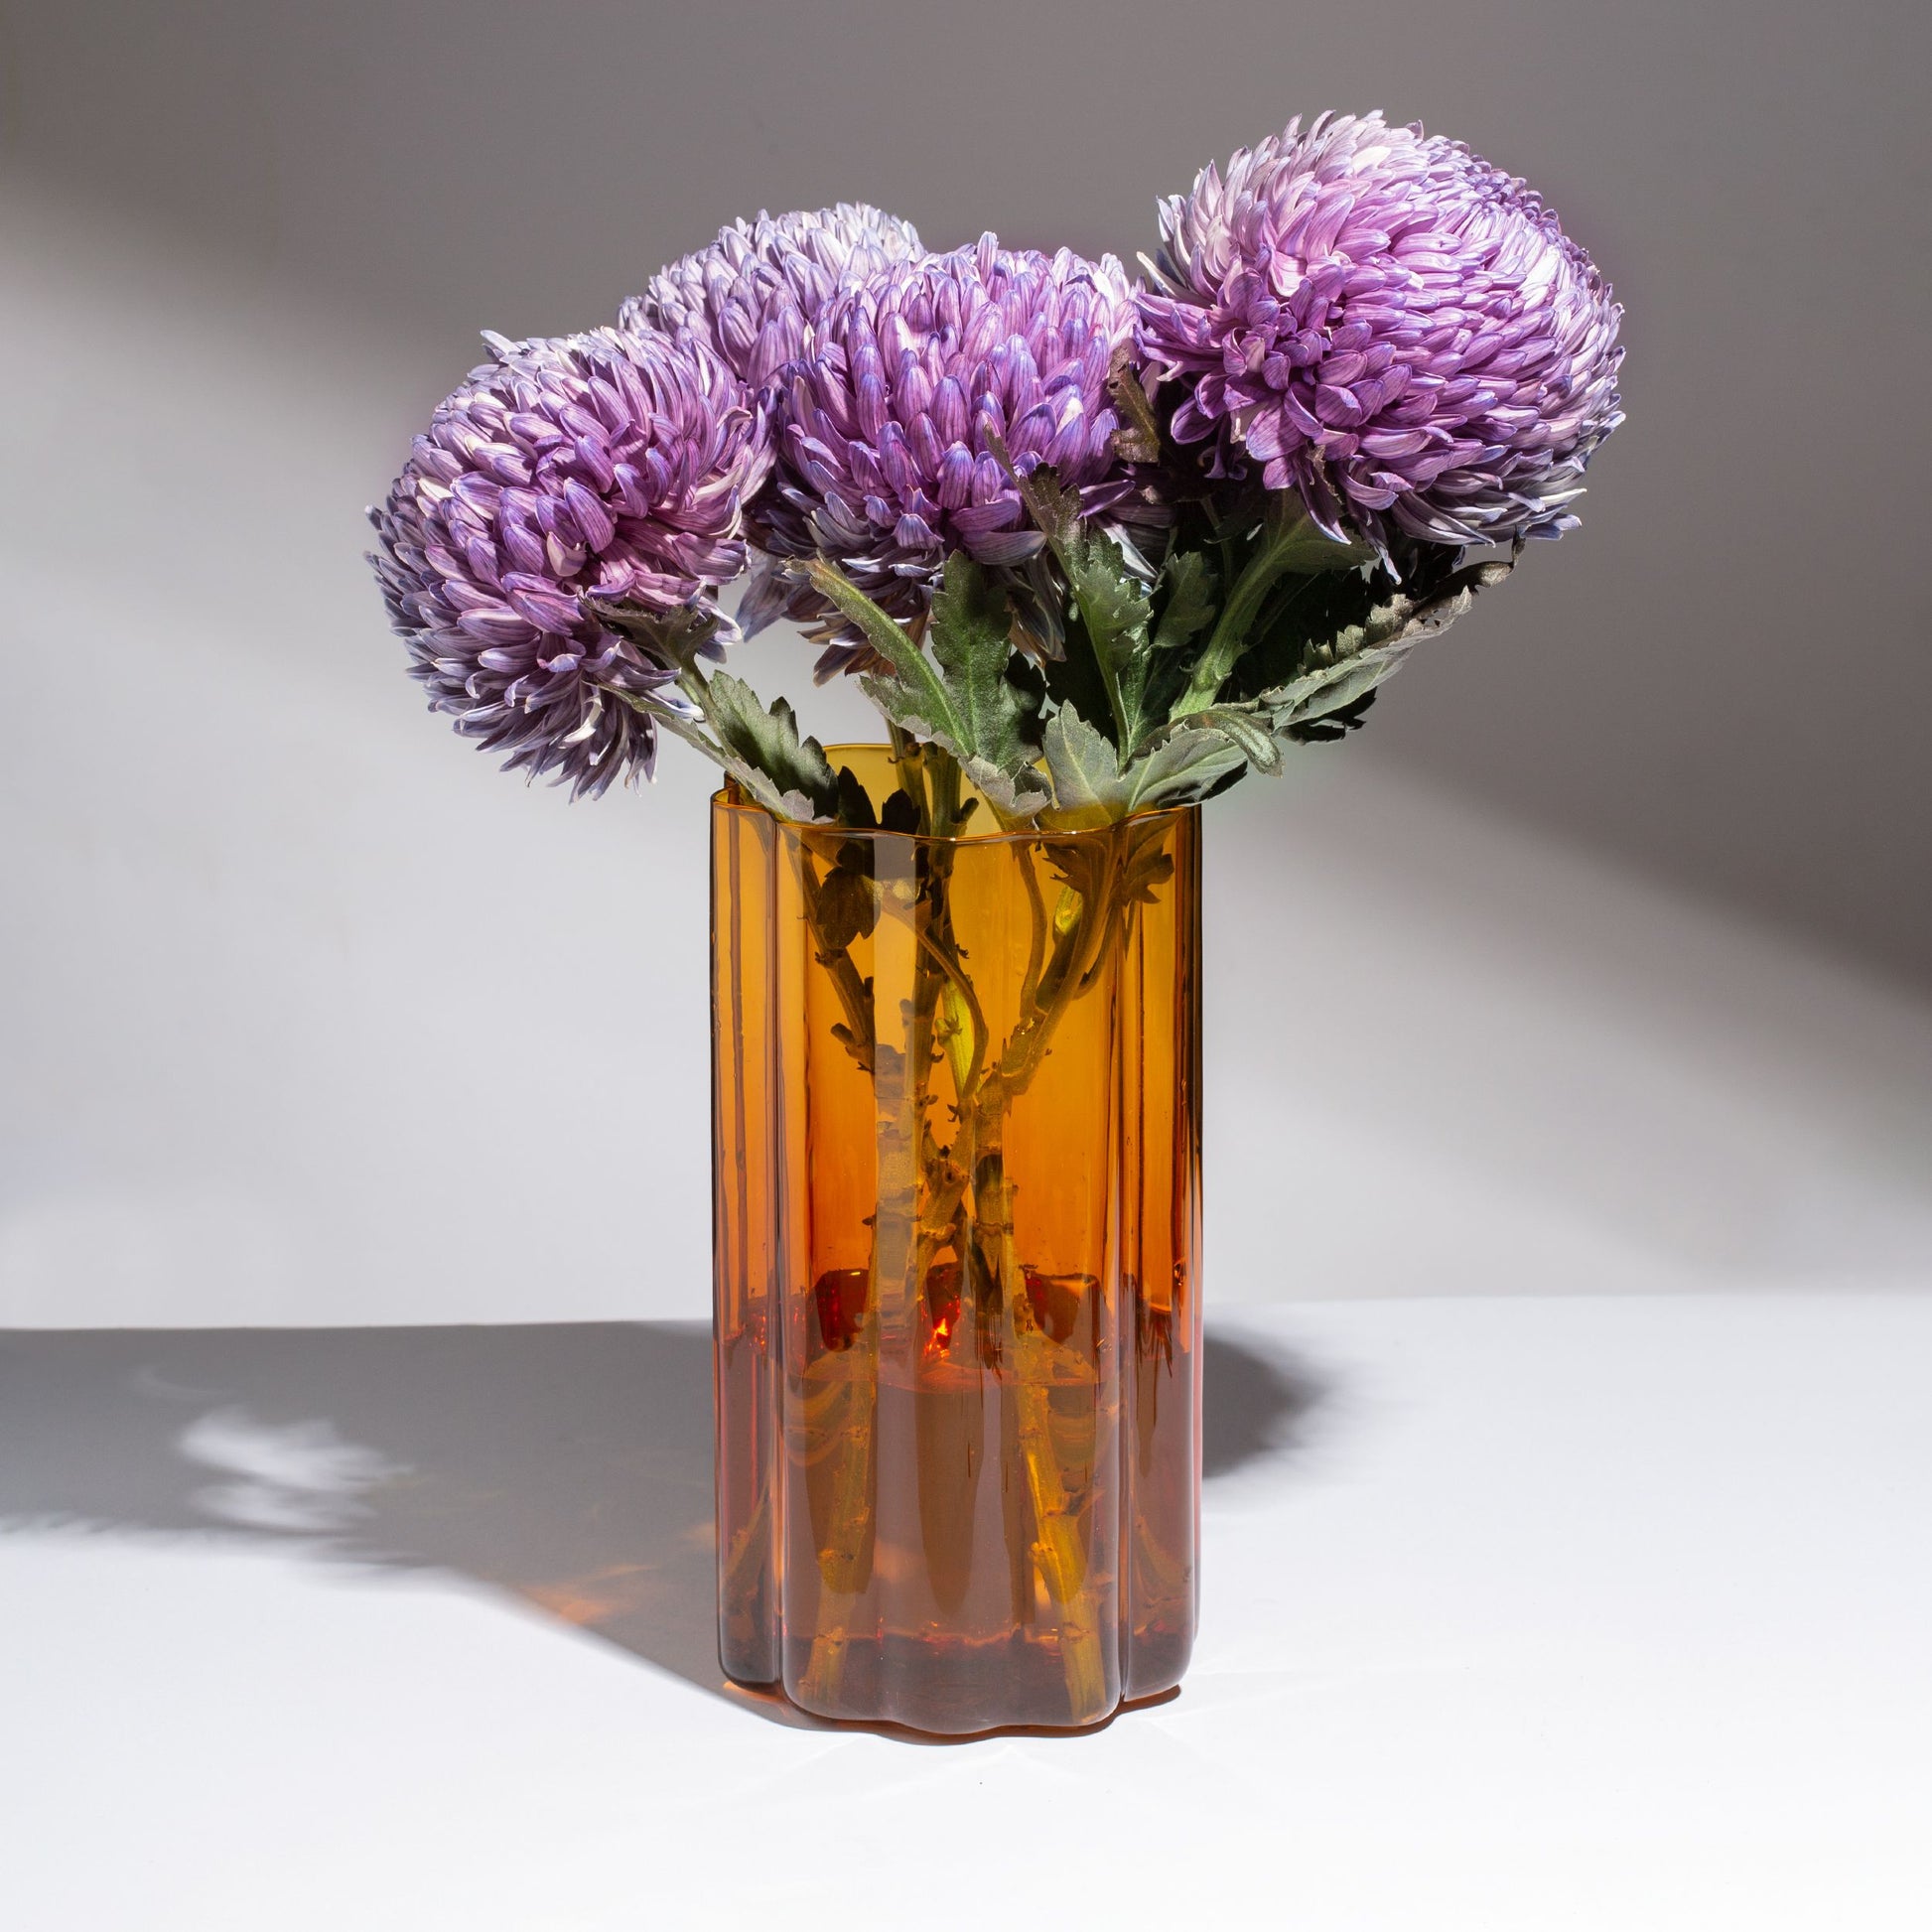 FAZEEK’s Wave Vase - Amber is finely crafted from hand-blown coloured glass and features our signature rippled edge. Beautiful in its simplicity, the Wave Vase will complement any space.